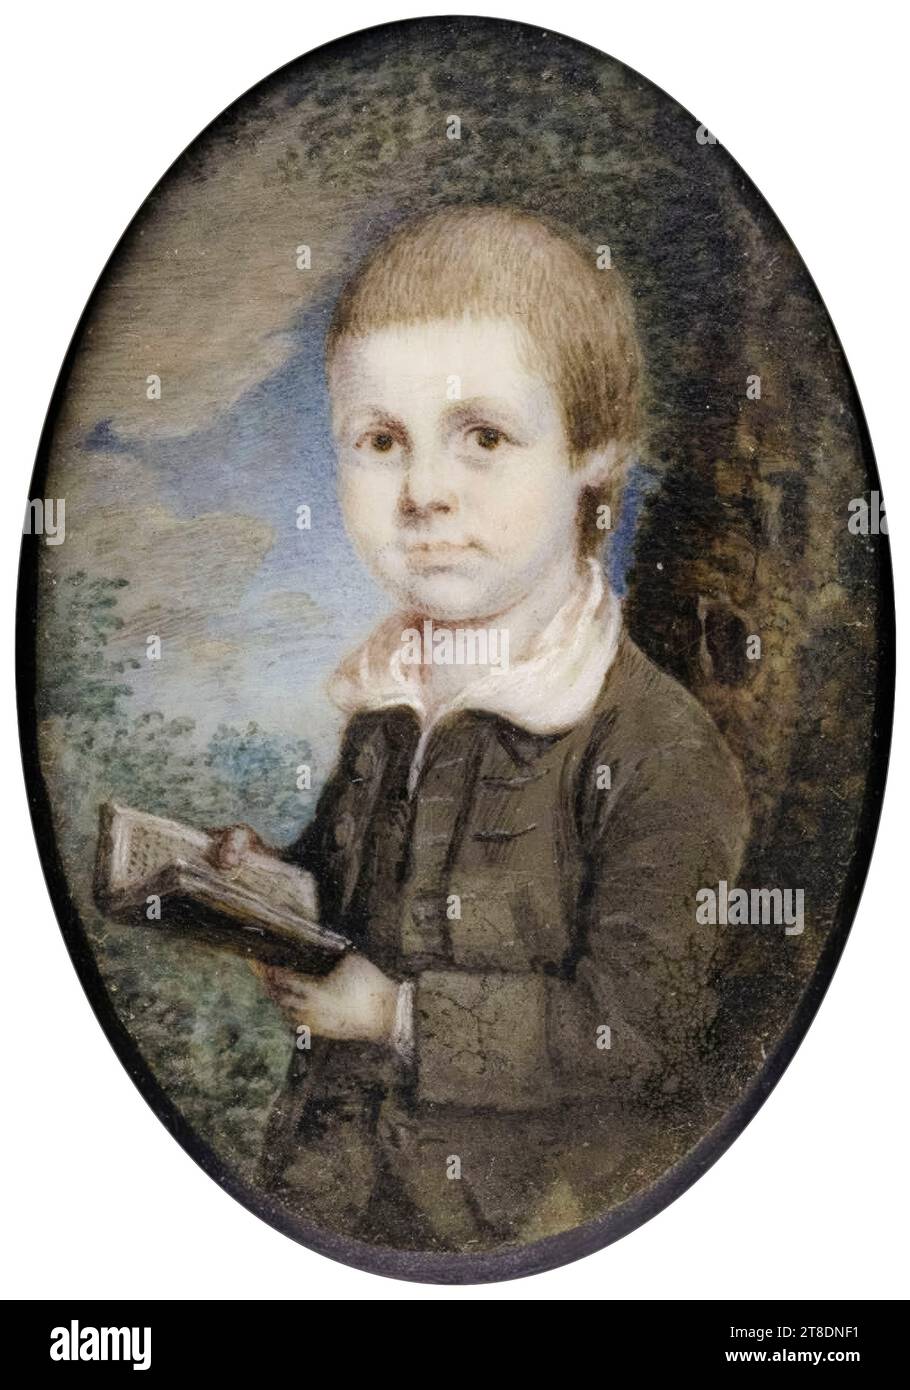 Charles Willson Peale, Portrait of a Young Boy, watercolour painting on ivory, 1766-1770 Stock Photo